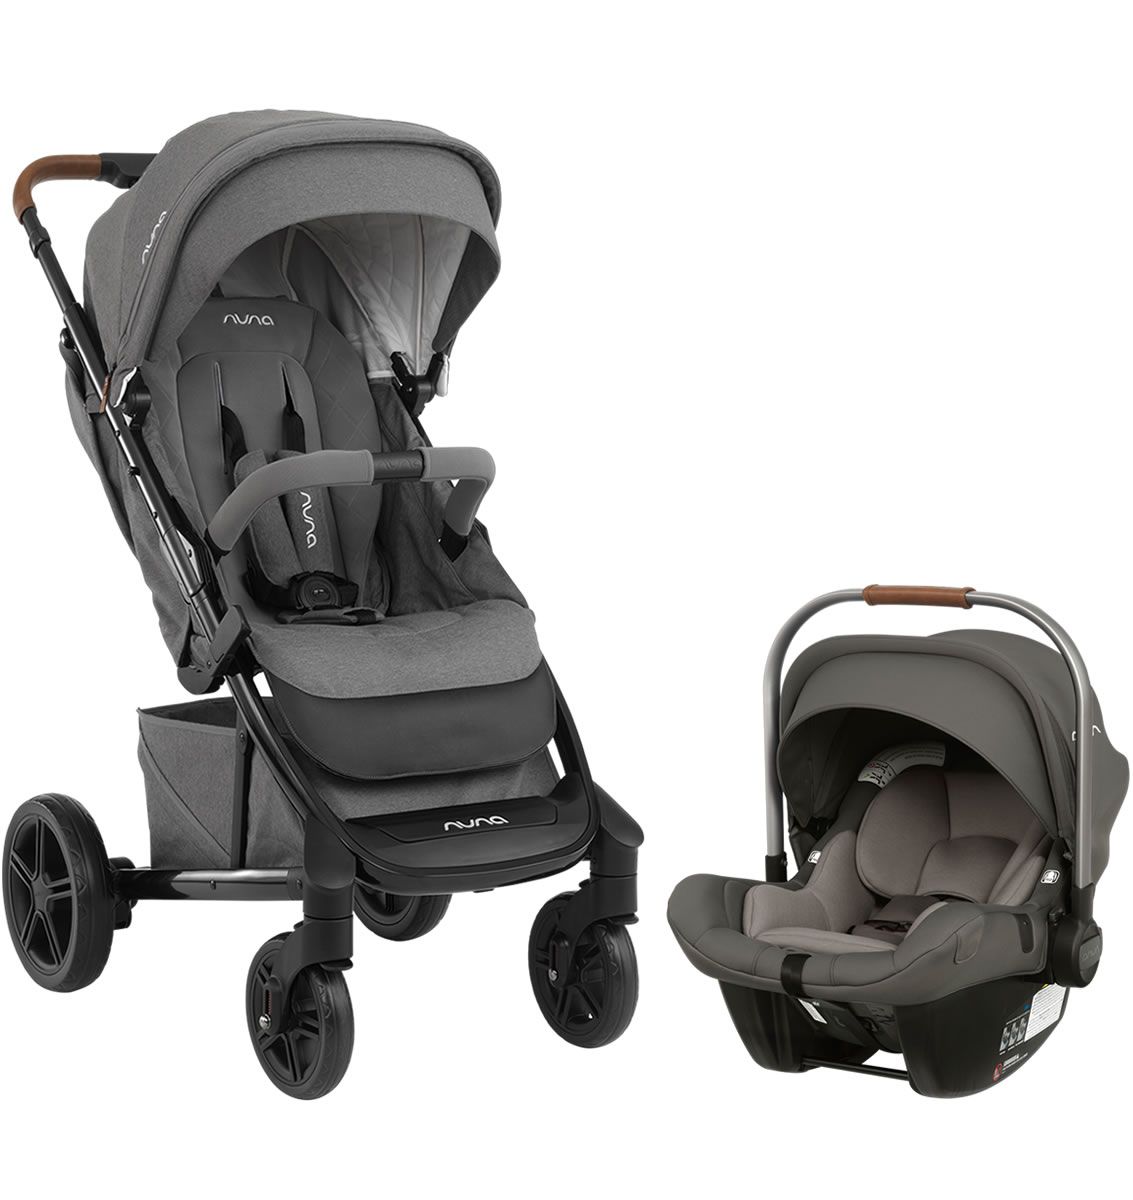 graco fast action fold stroller